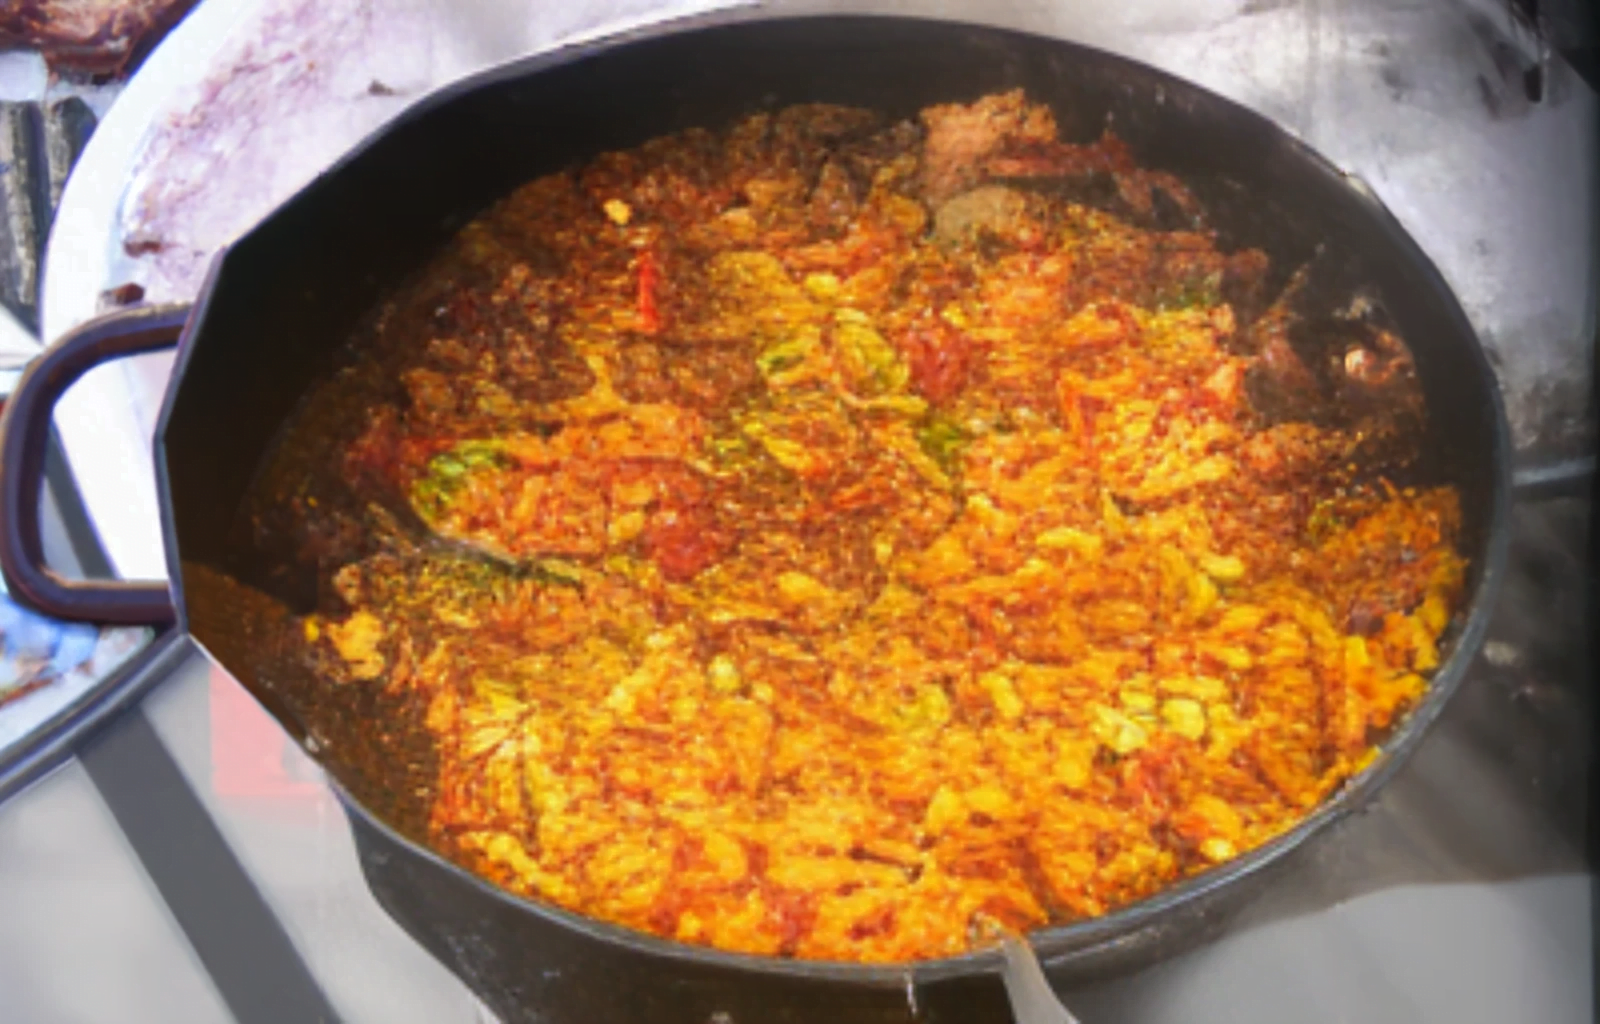 Paella is a compact and performant text to image AI model